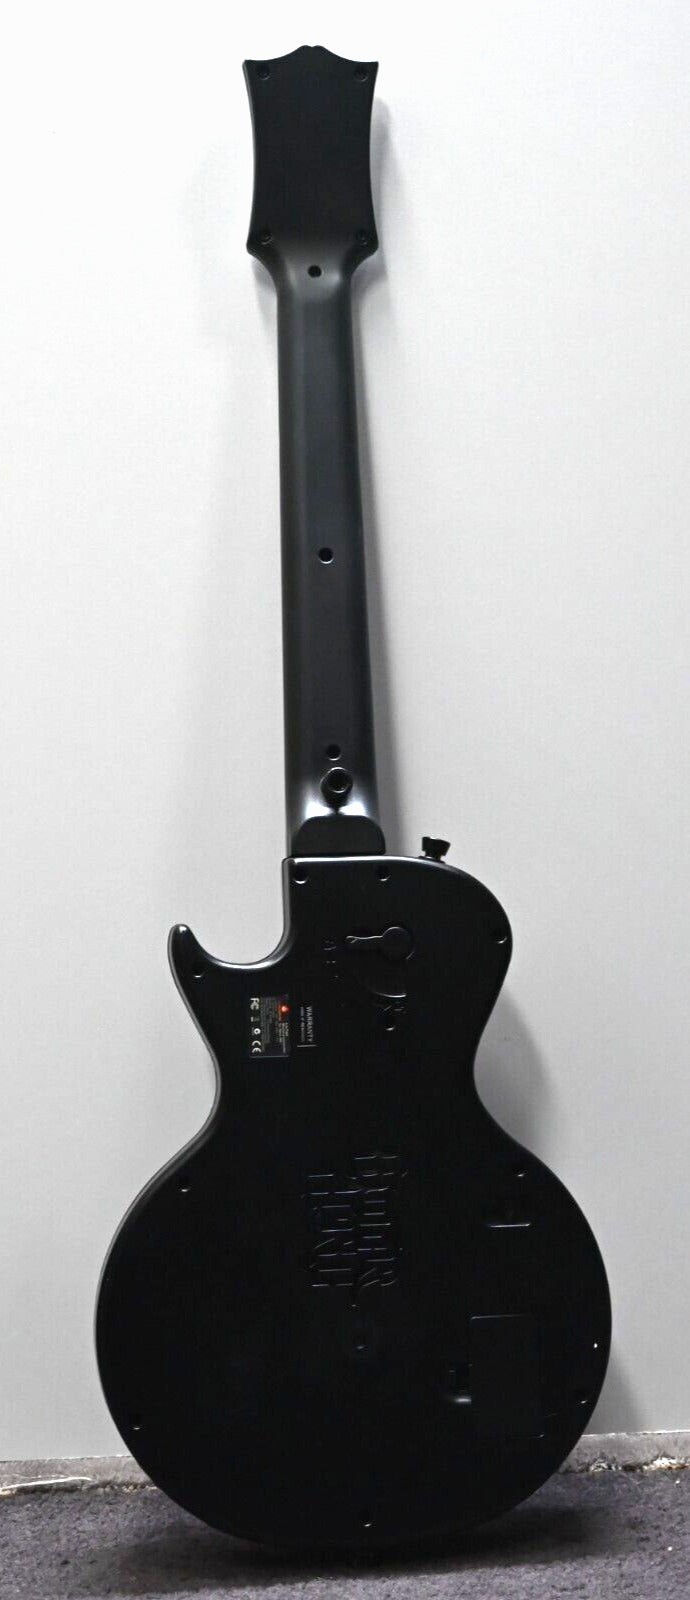 Guitar Hero Gibson Les Paul - Wireless Guitar - Red Octane - Xbox 360 Accessory